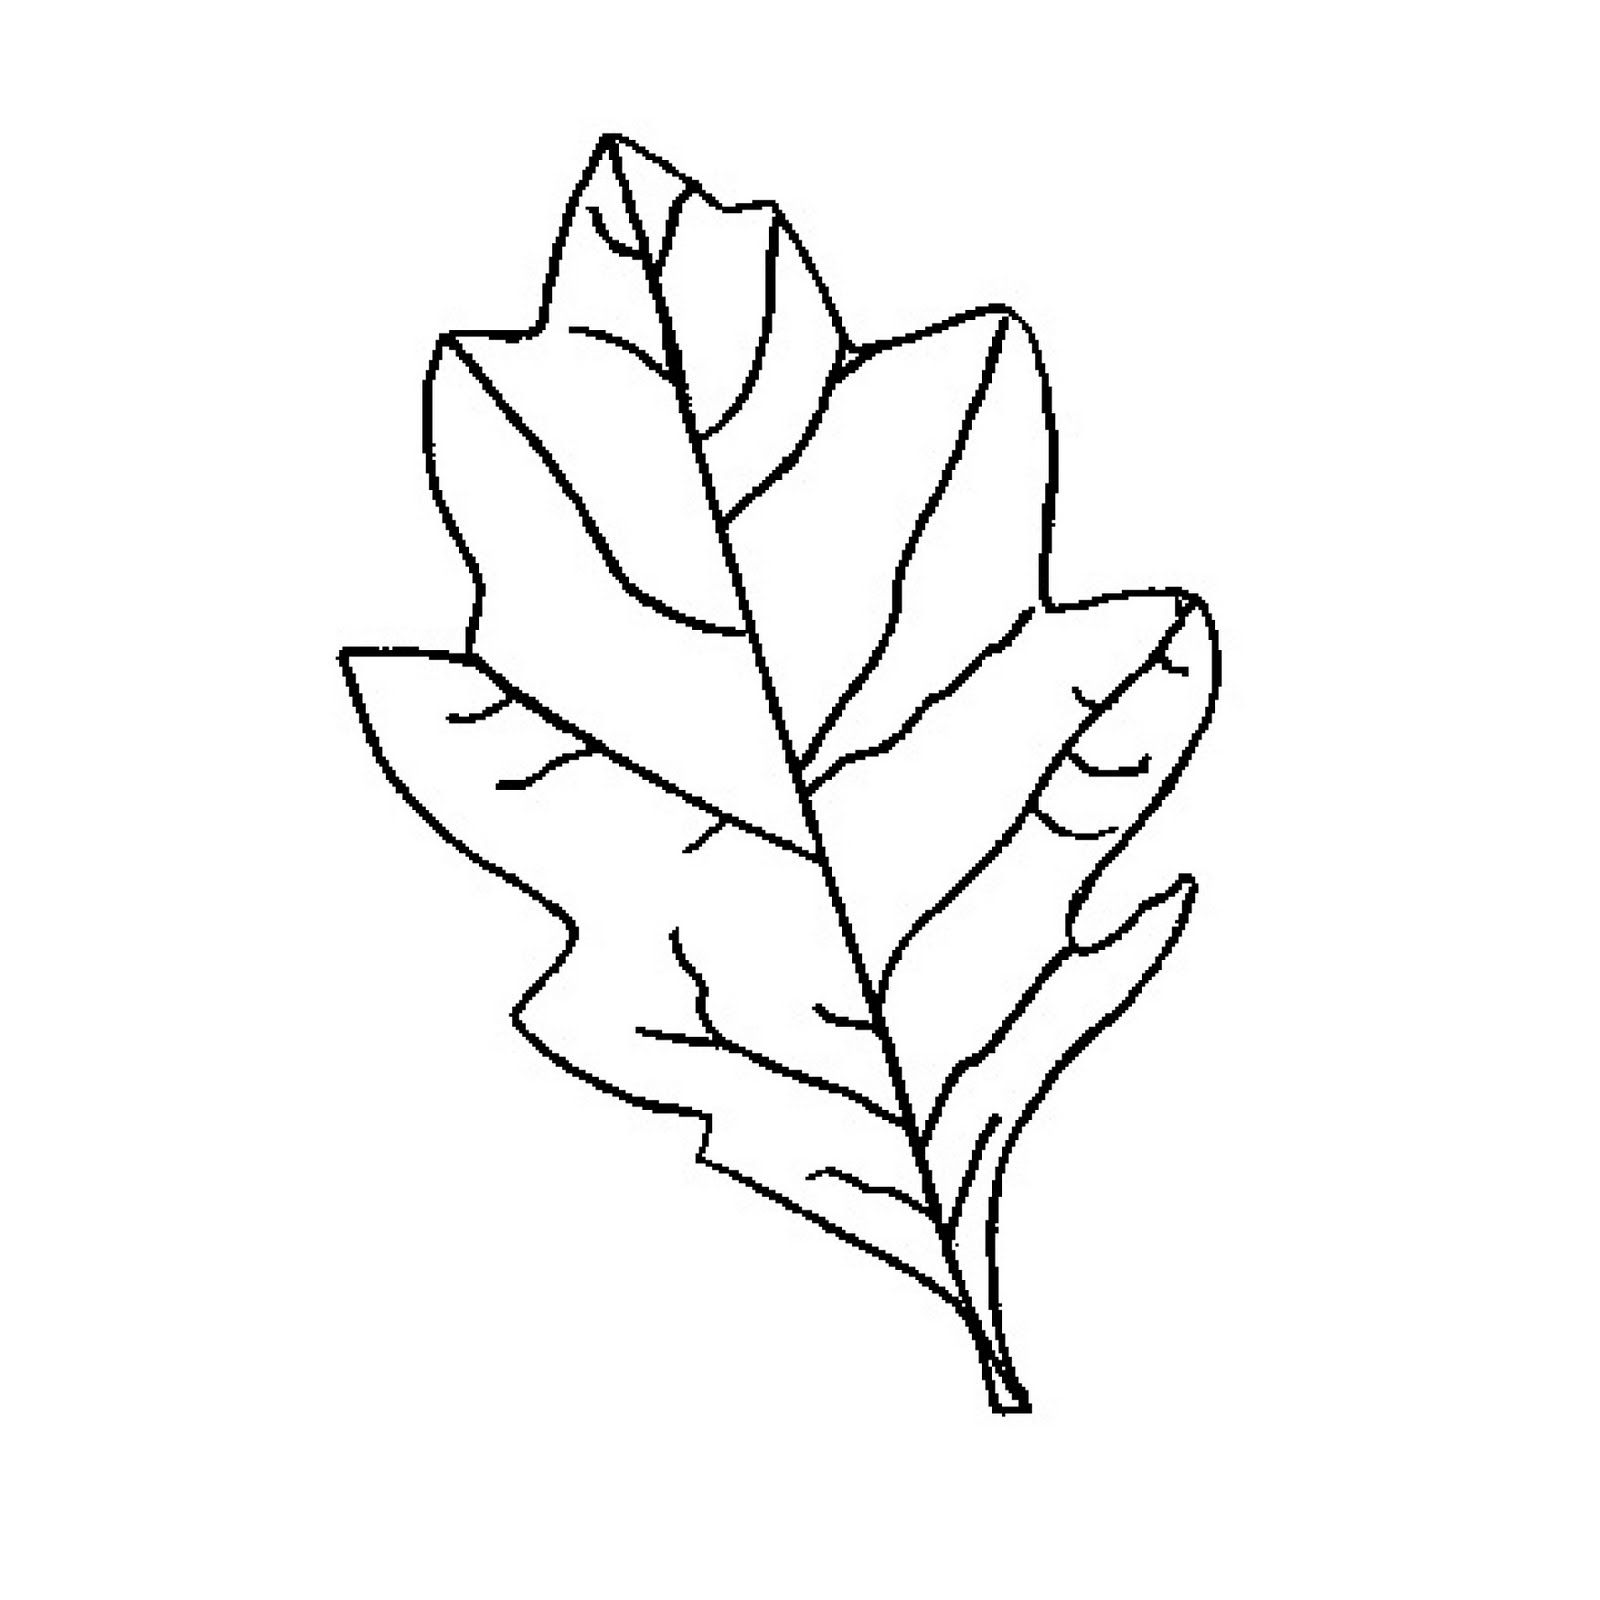 Picture Of An Oak Leaf - ClipArt Best